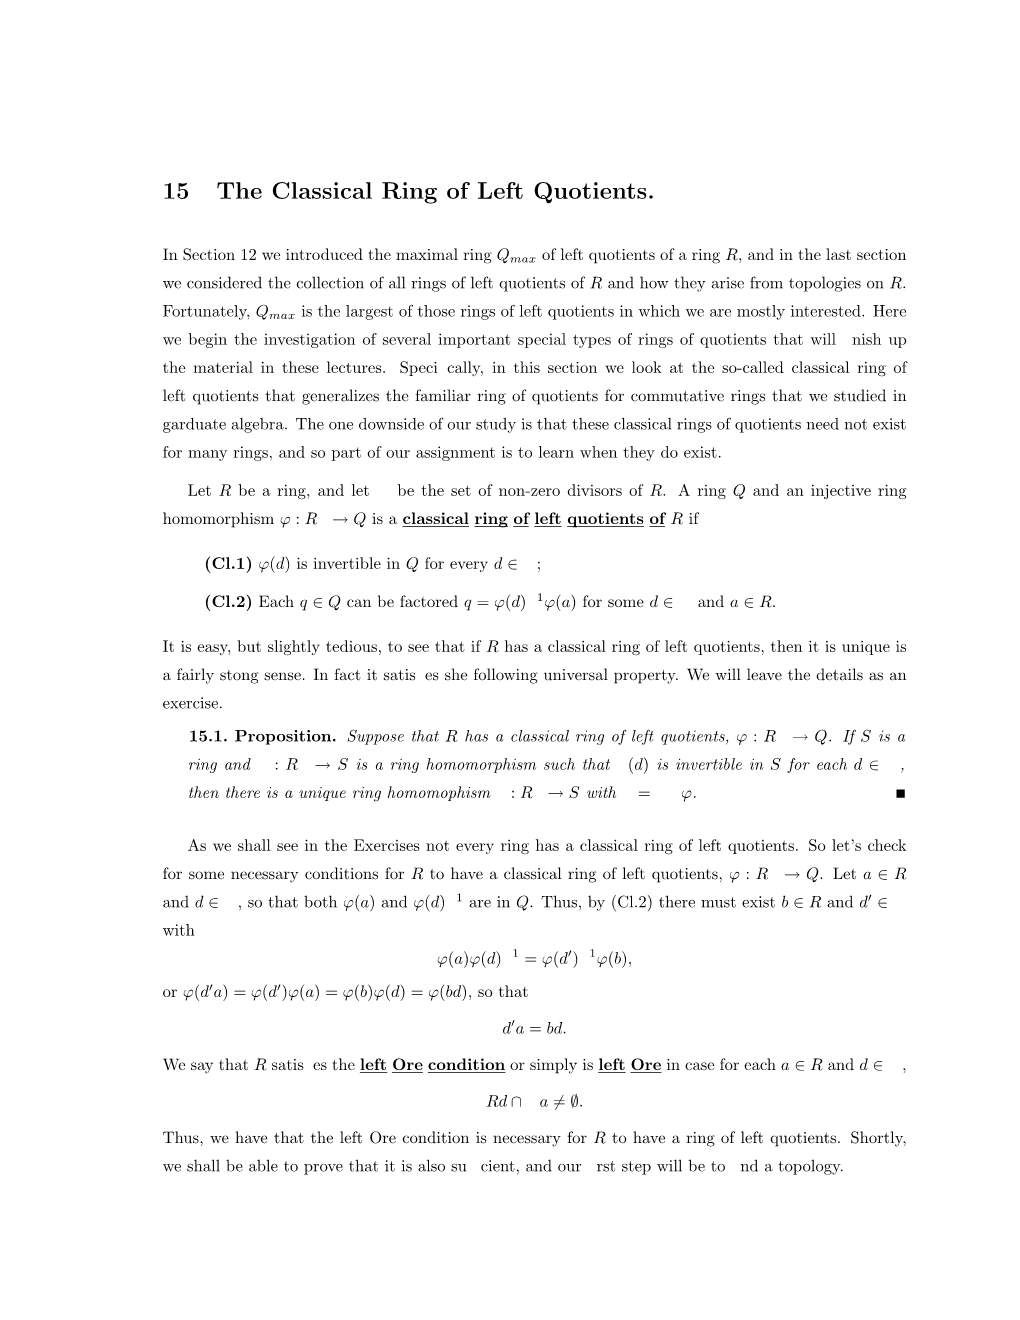 15 the Classical Ring of Left Quotients